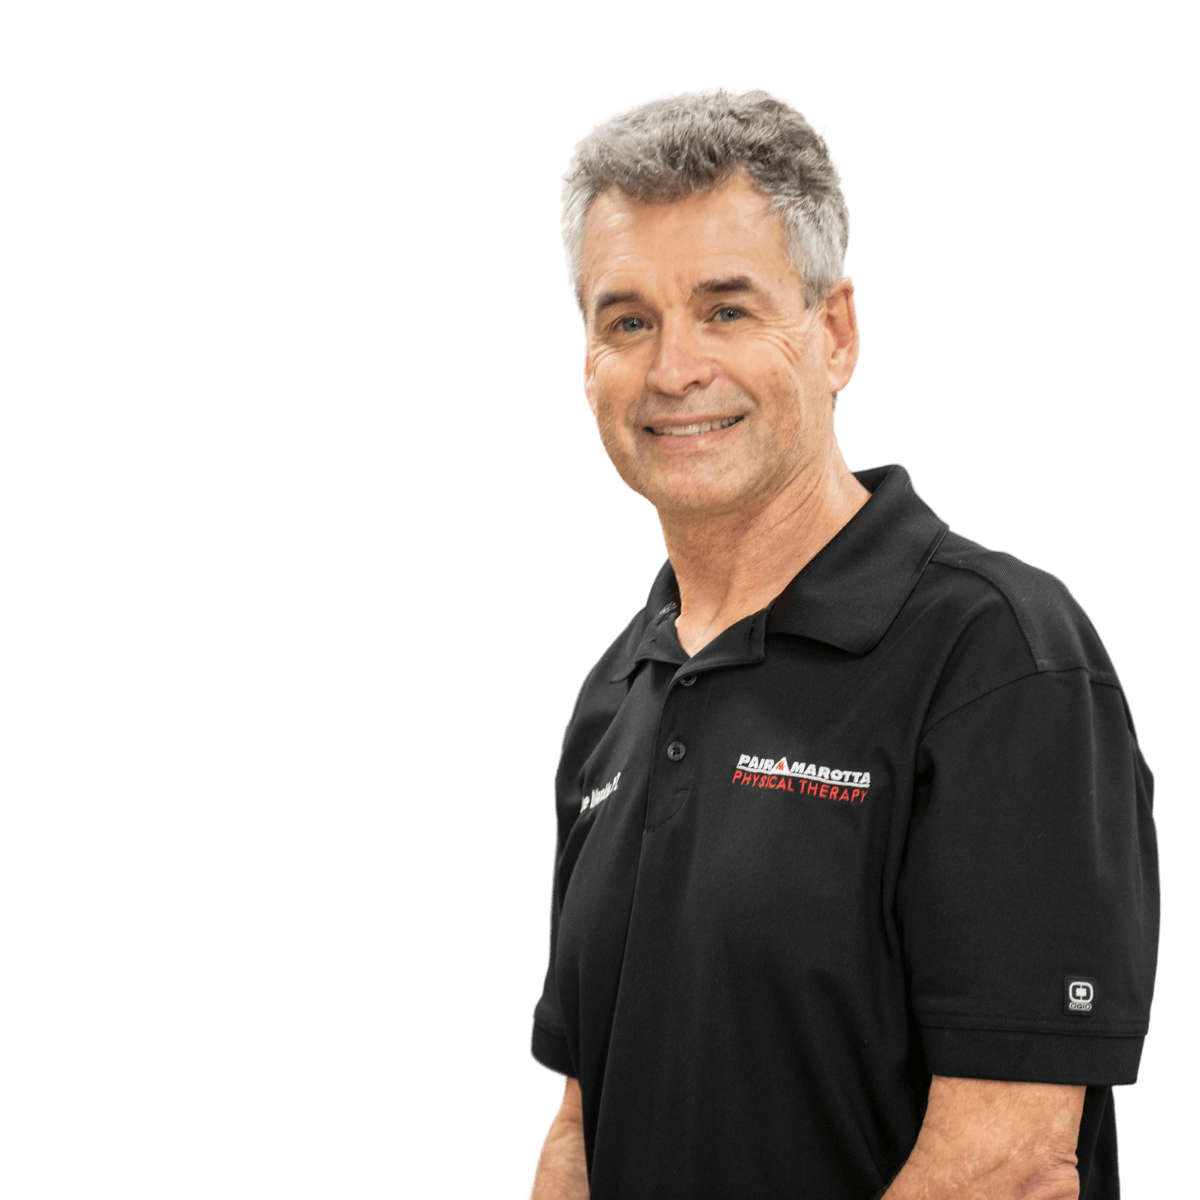 Mike Marotta of Pair & Marotta Physical Therapy